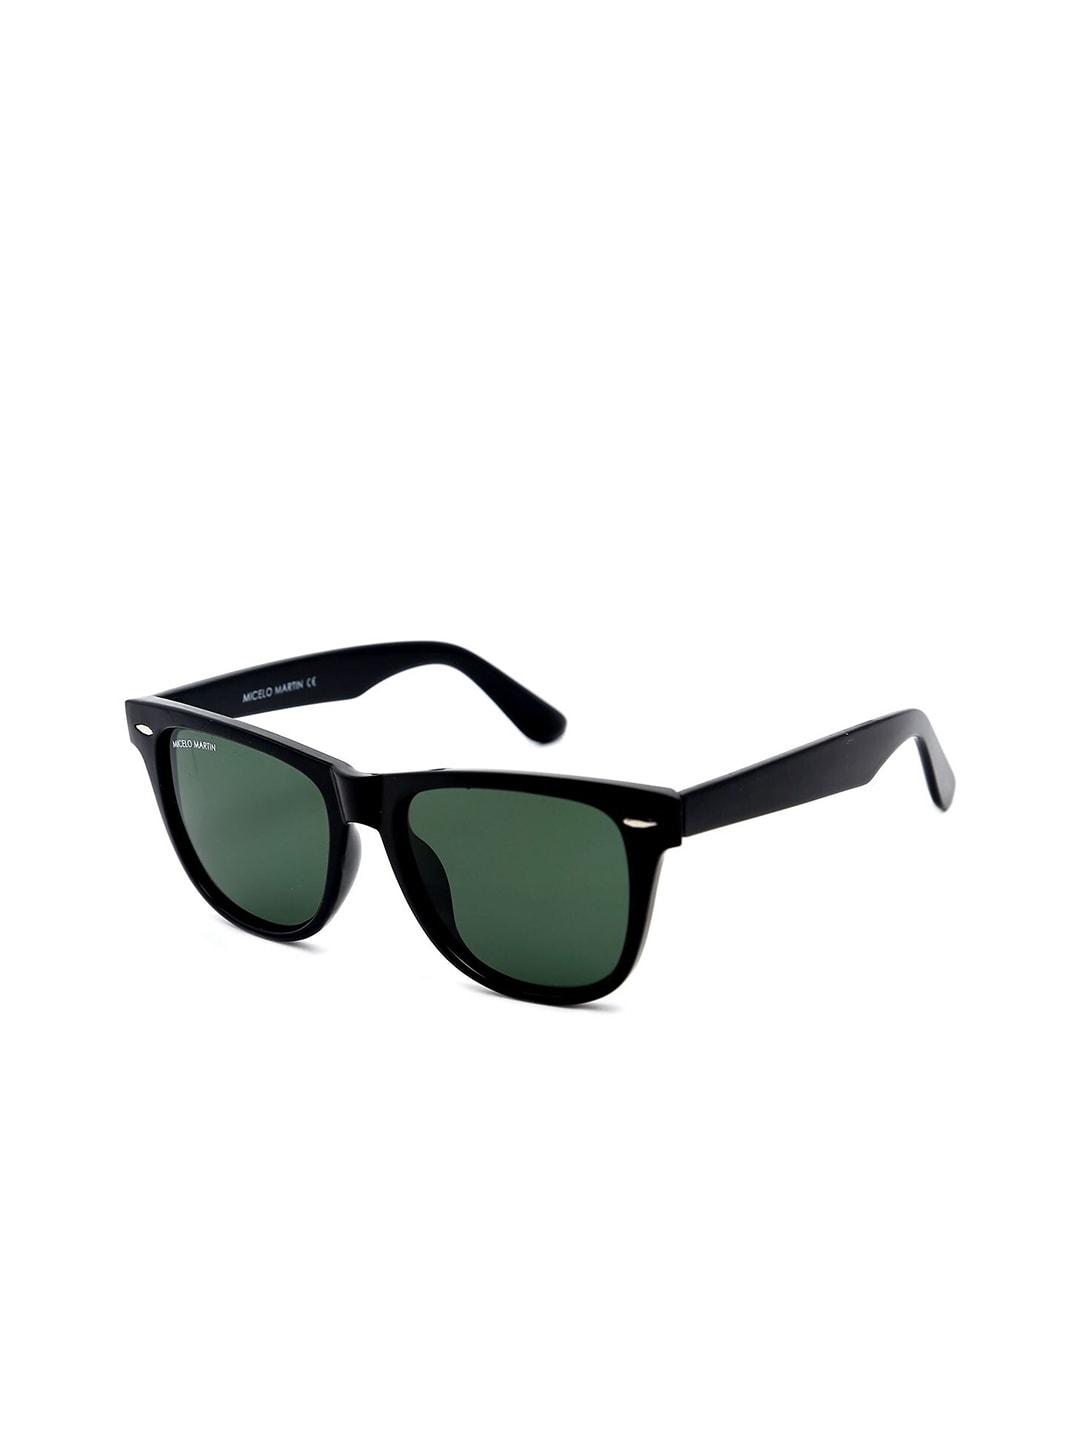 Micelo Martin Unisex Green Lens & Black Square Sunglasses with UV Protected Lens MM2001 C5